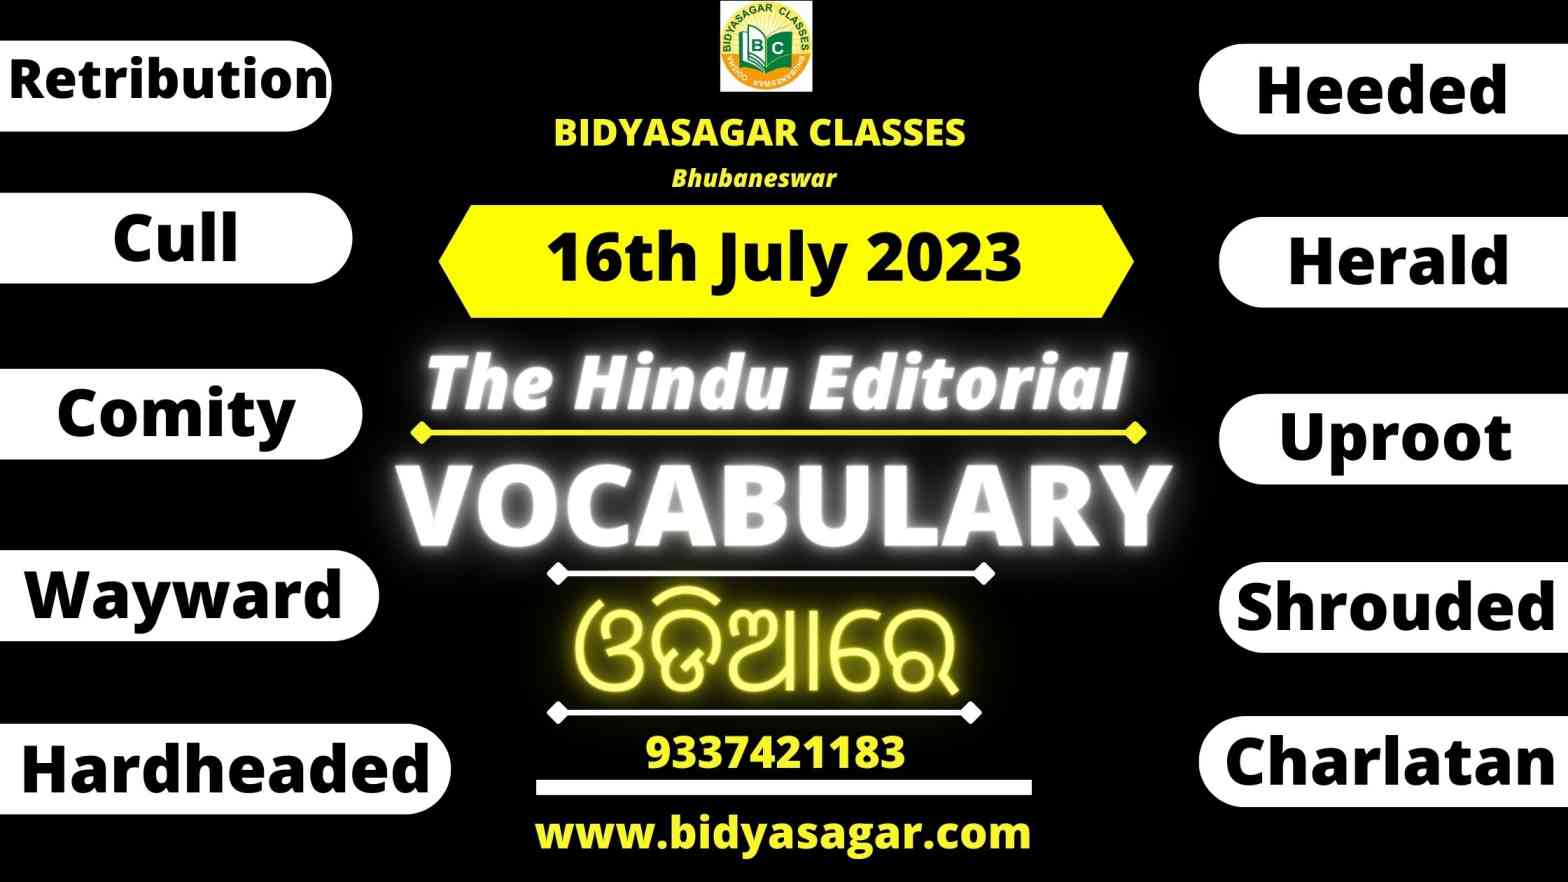 The Hindu Editorial Vocabulary of 16th July 2023